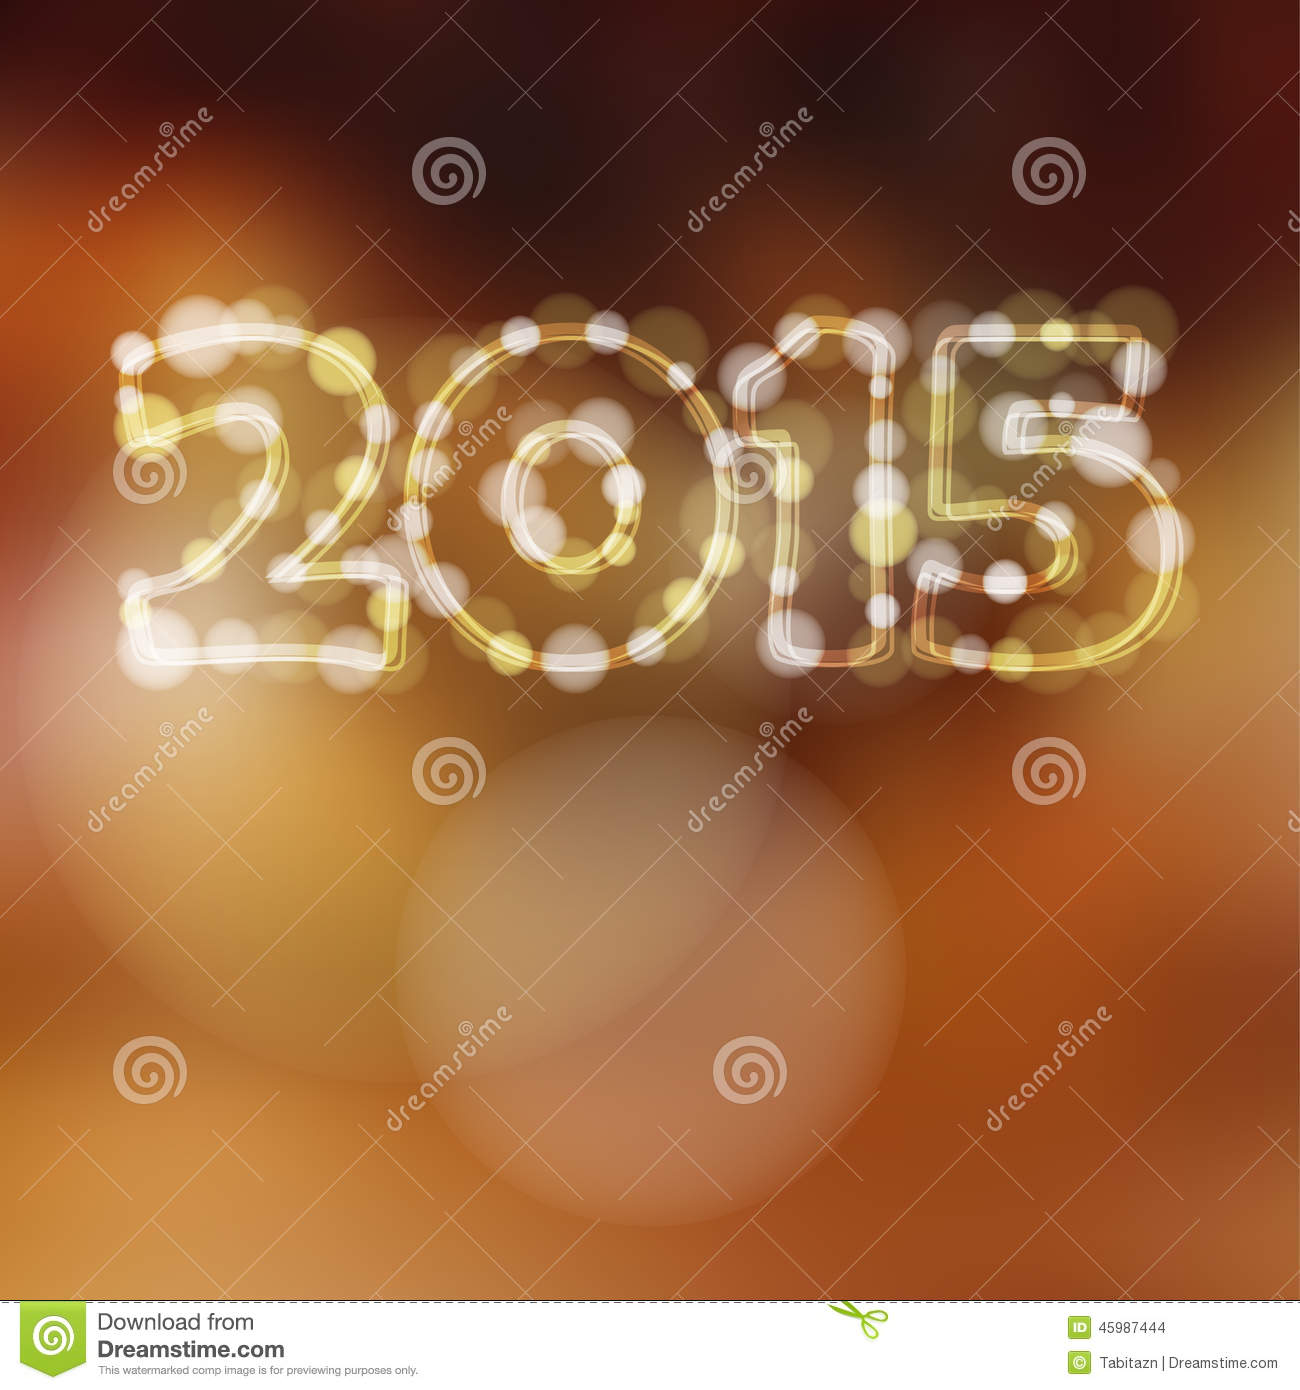     Year Greeting Card 2015 Glitter Lights Stock Vector   Image  45987444